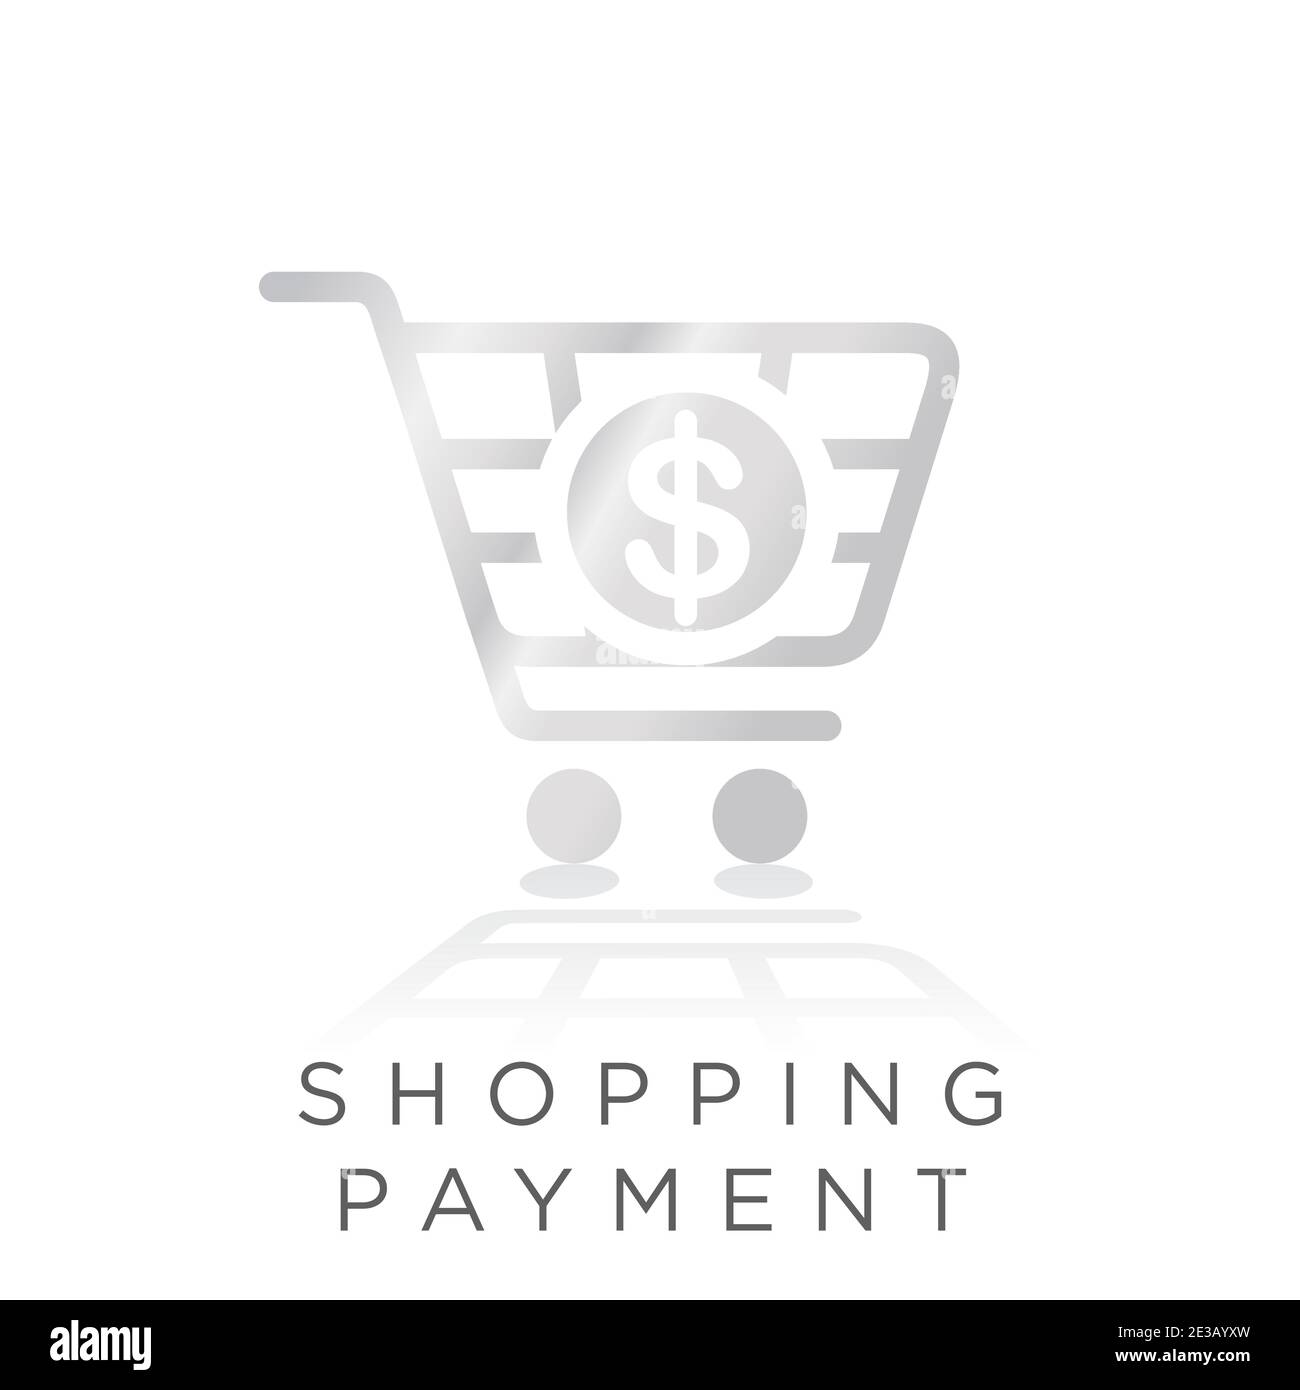 shopping payment metal gradient icon. shopping art with dollar currency inside vector illustration Stock Vector